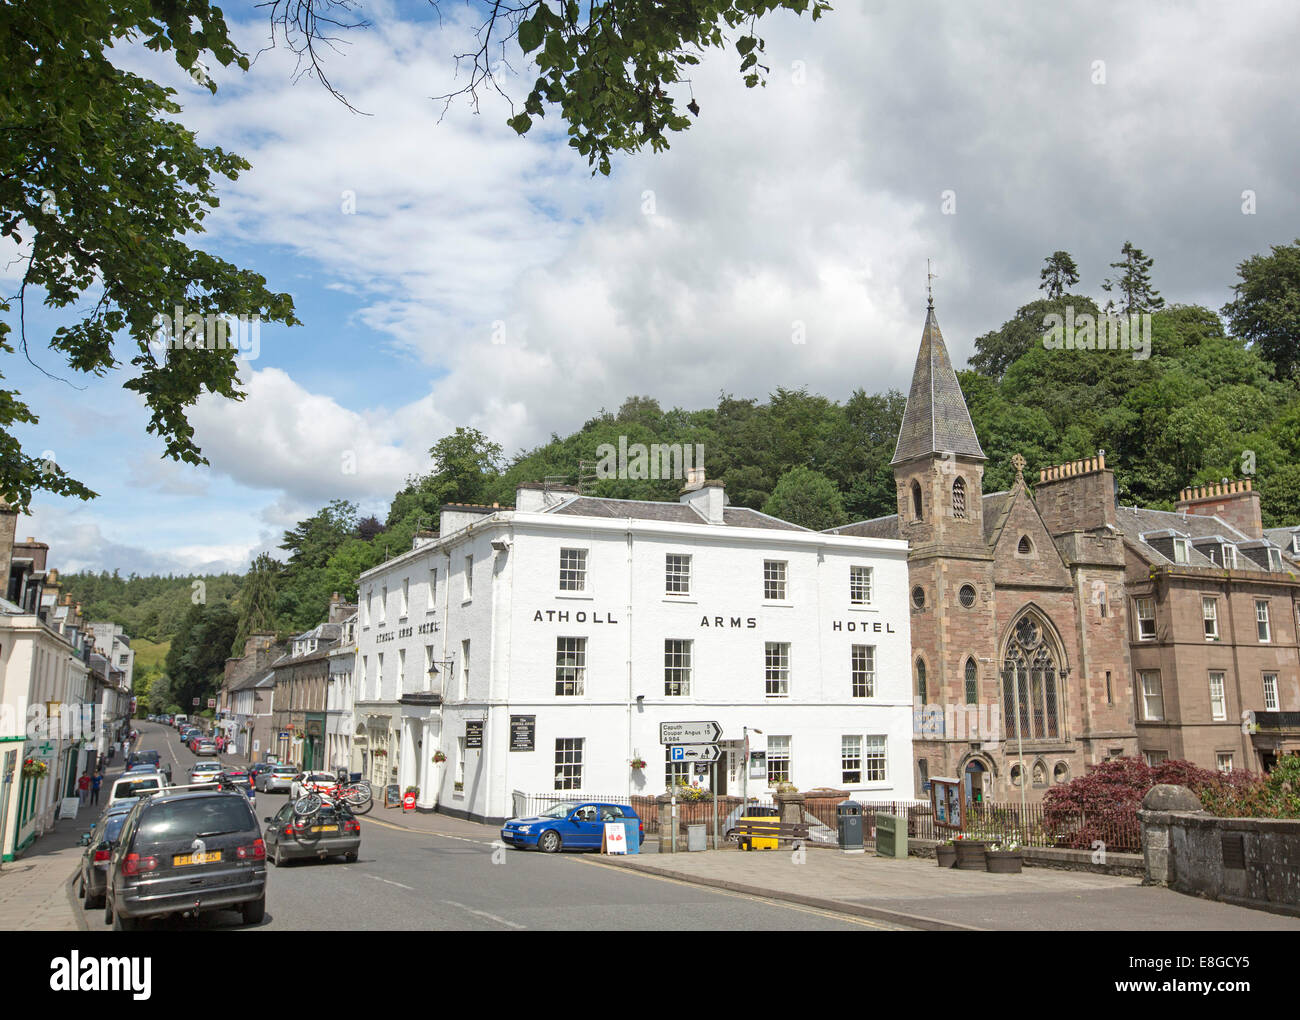 Main street of Scottish town of Dunkeld with historic 19th century Atholl Arms Hotel and old church in foreground Stock Photo